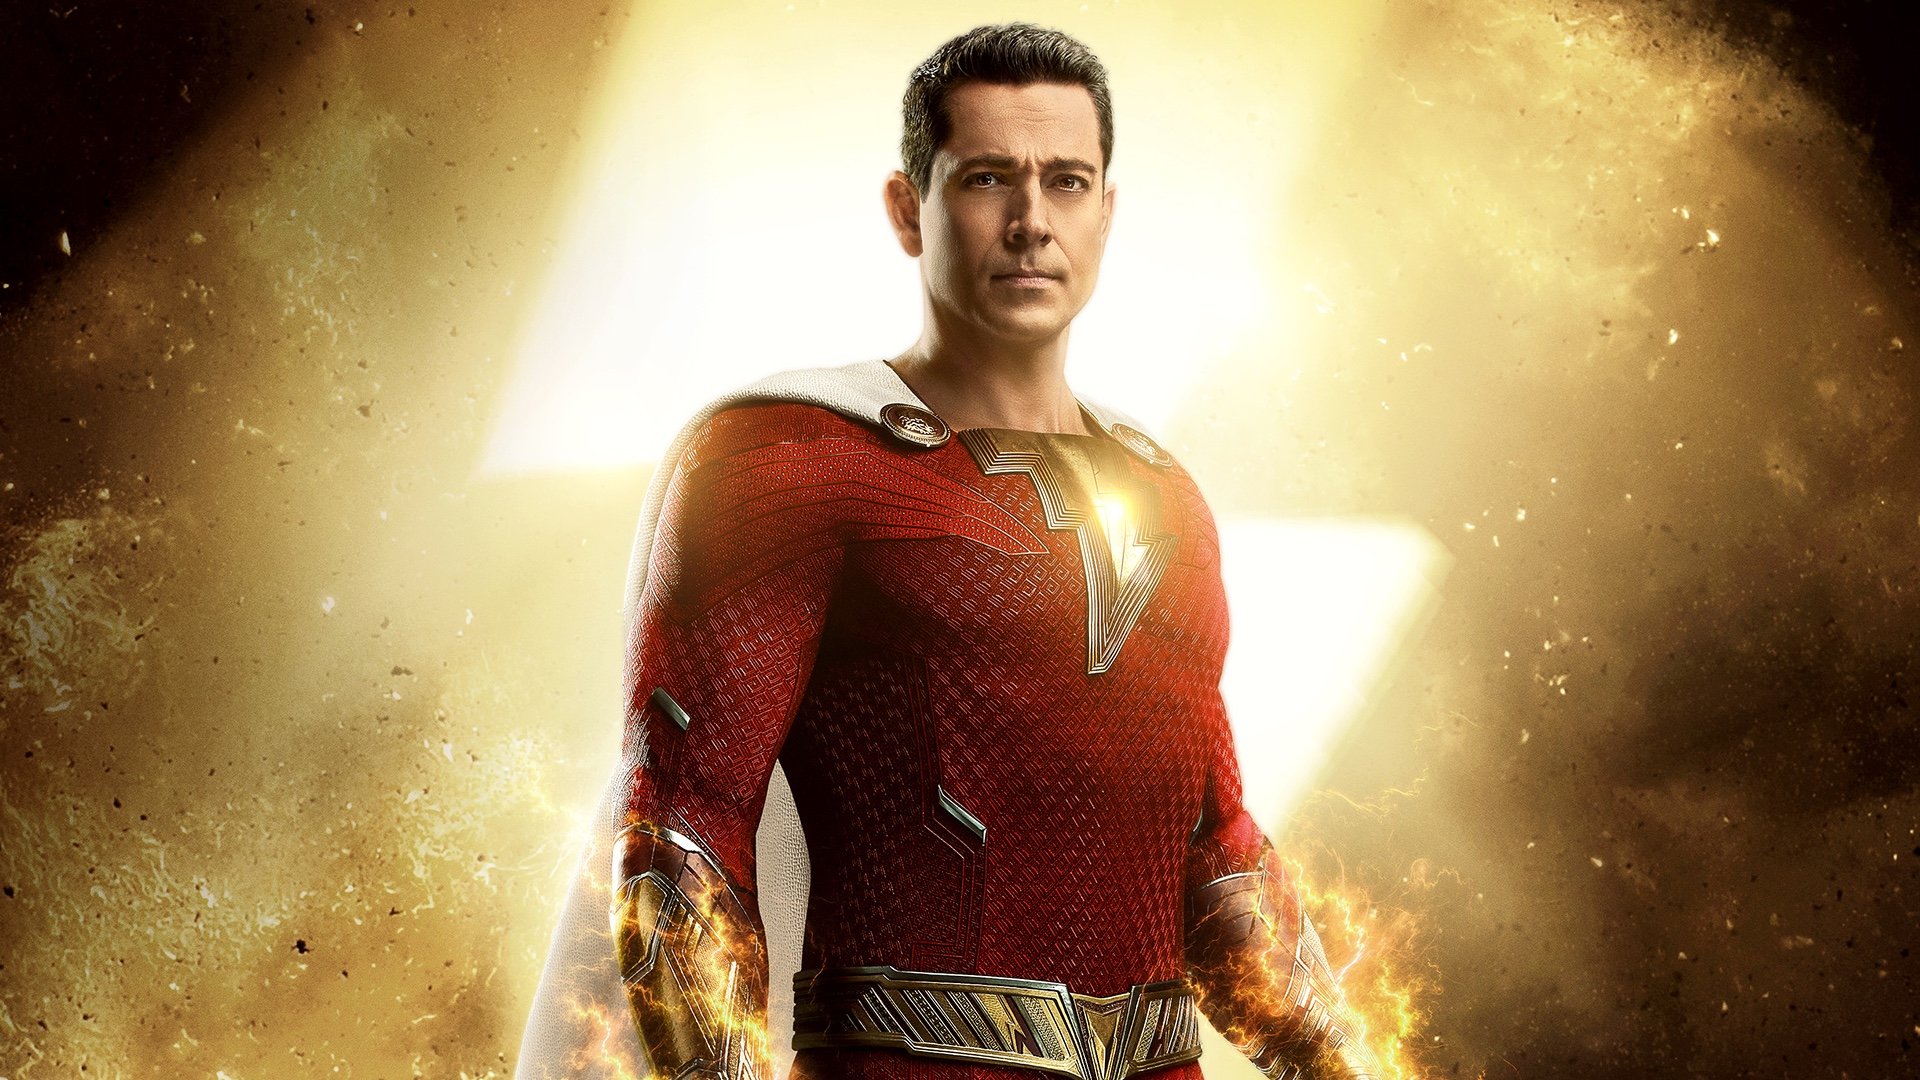 Shazam! Fury Of The Gods' Trailer: It's Time For Billy Batson